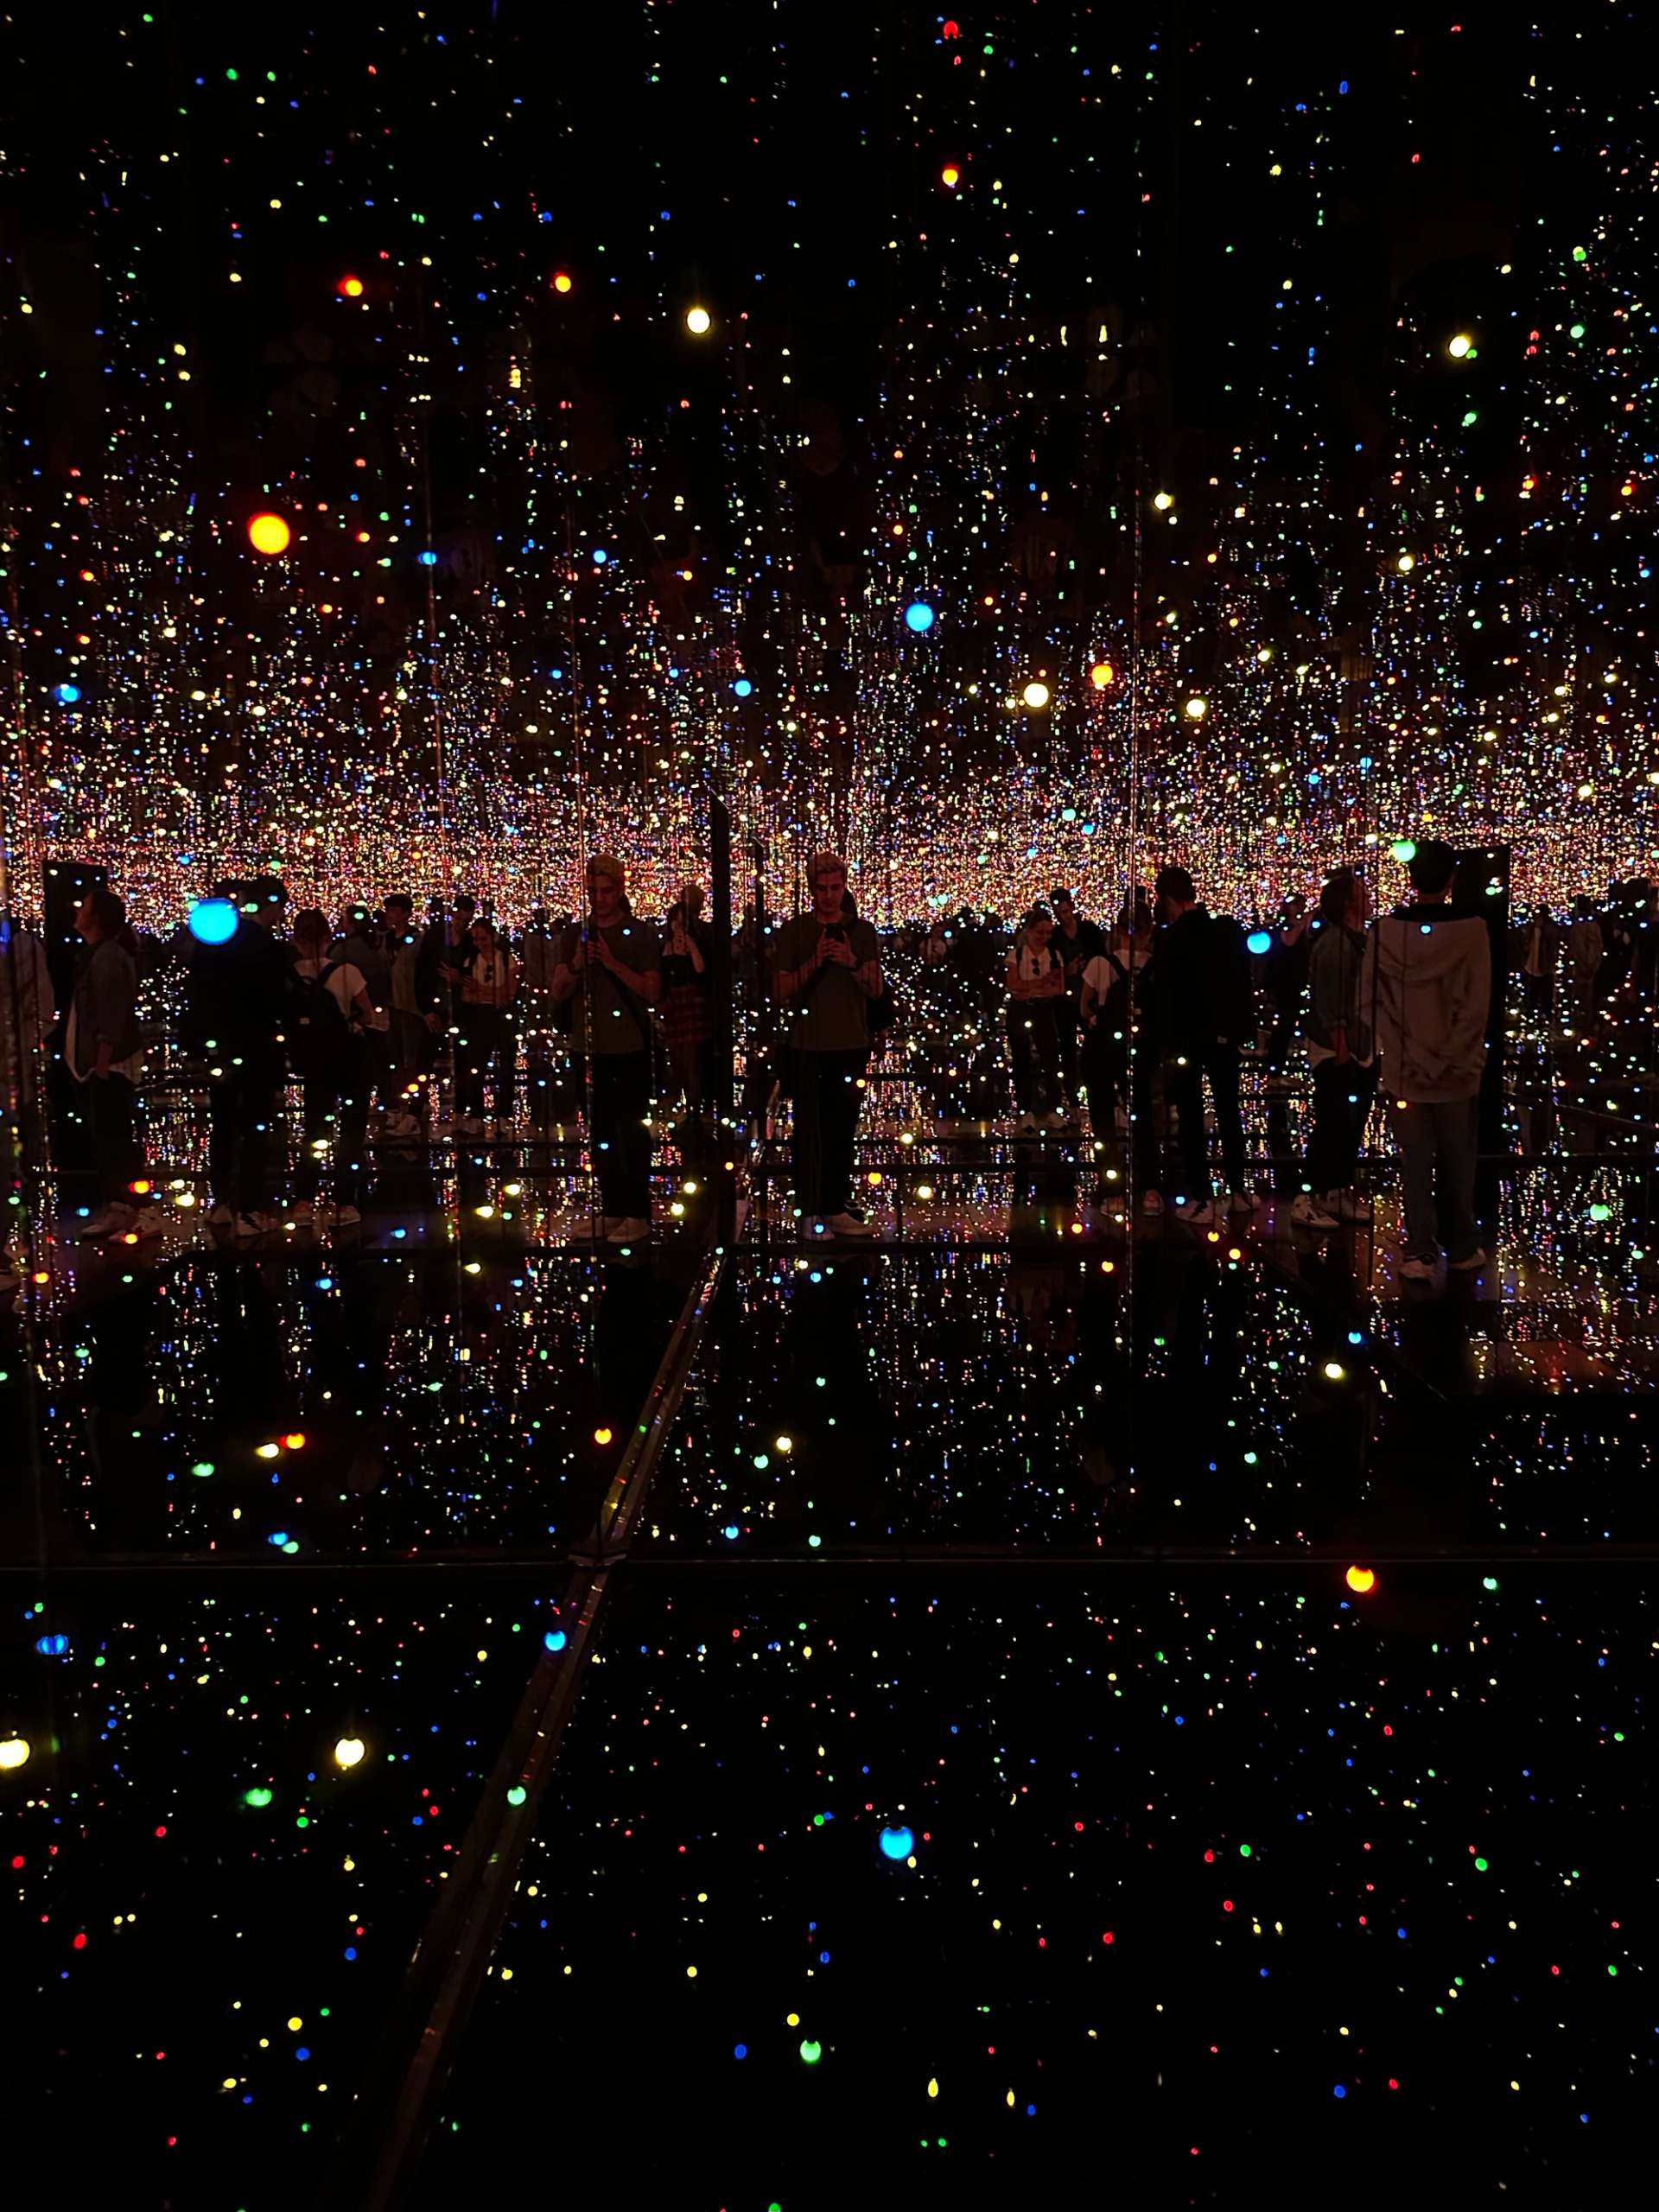 This photograph shows one of Yayoi Kusama's Infinity Rooms at the Tate Modern 2023, a mirrored environment with thousands of bright coloured lights.